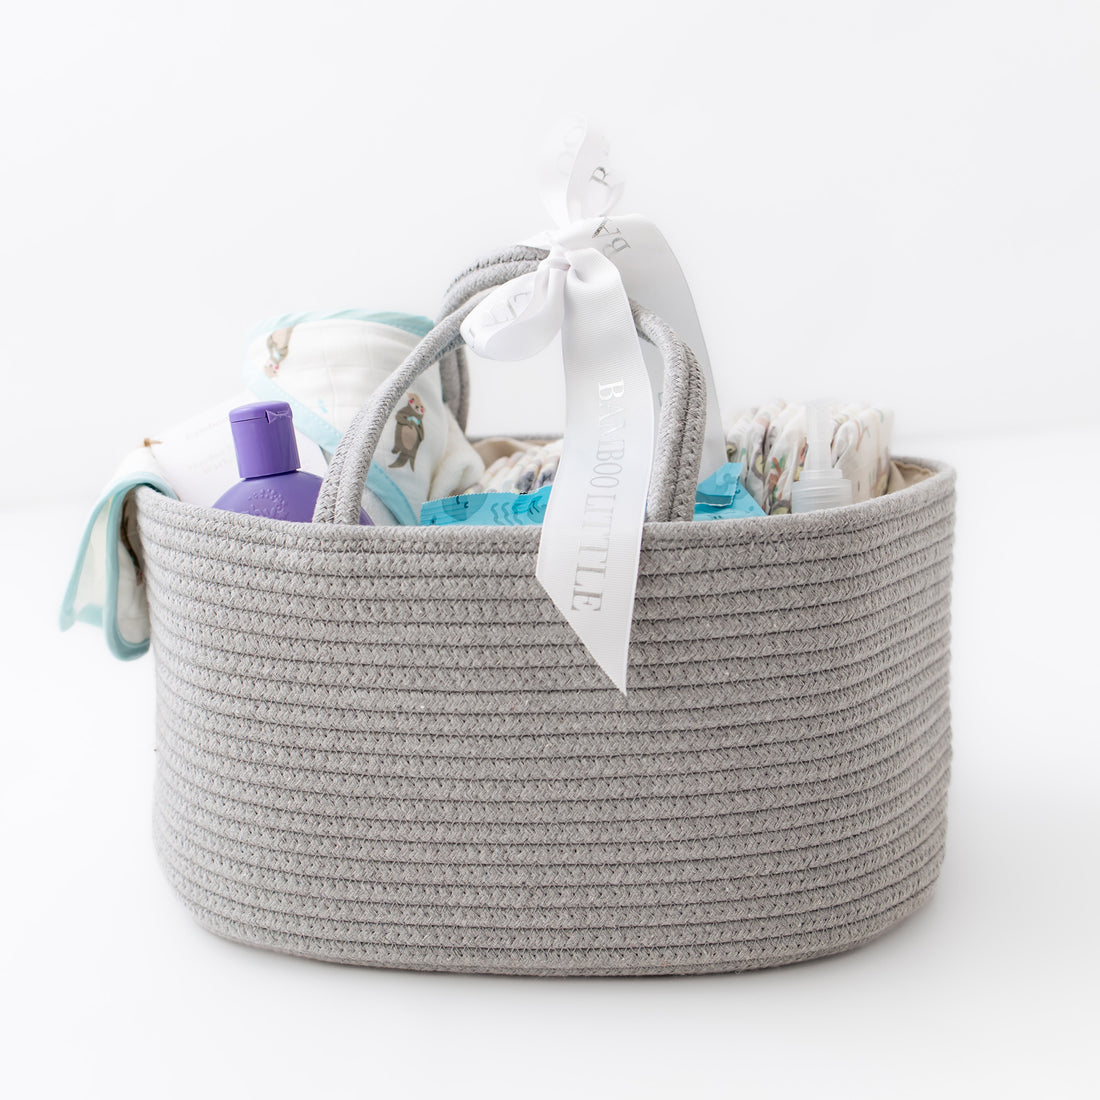 Eco-Friendly Baby Shower Gift Ideas: Bamboo Products for New Parents